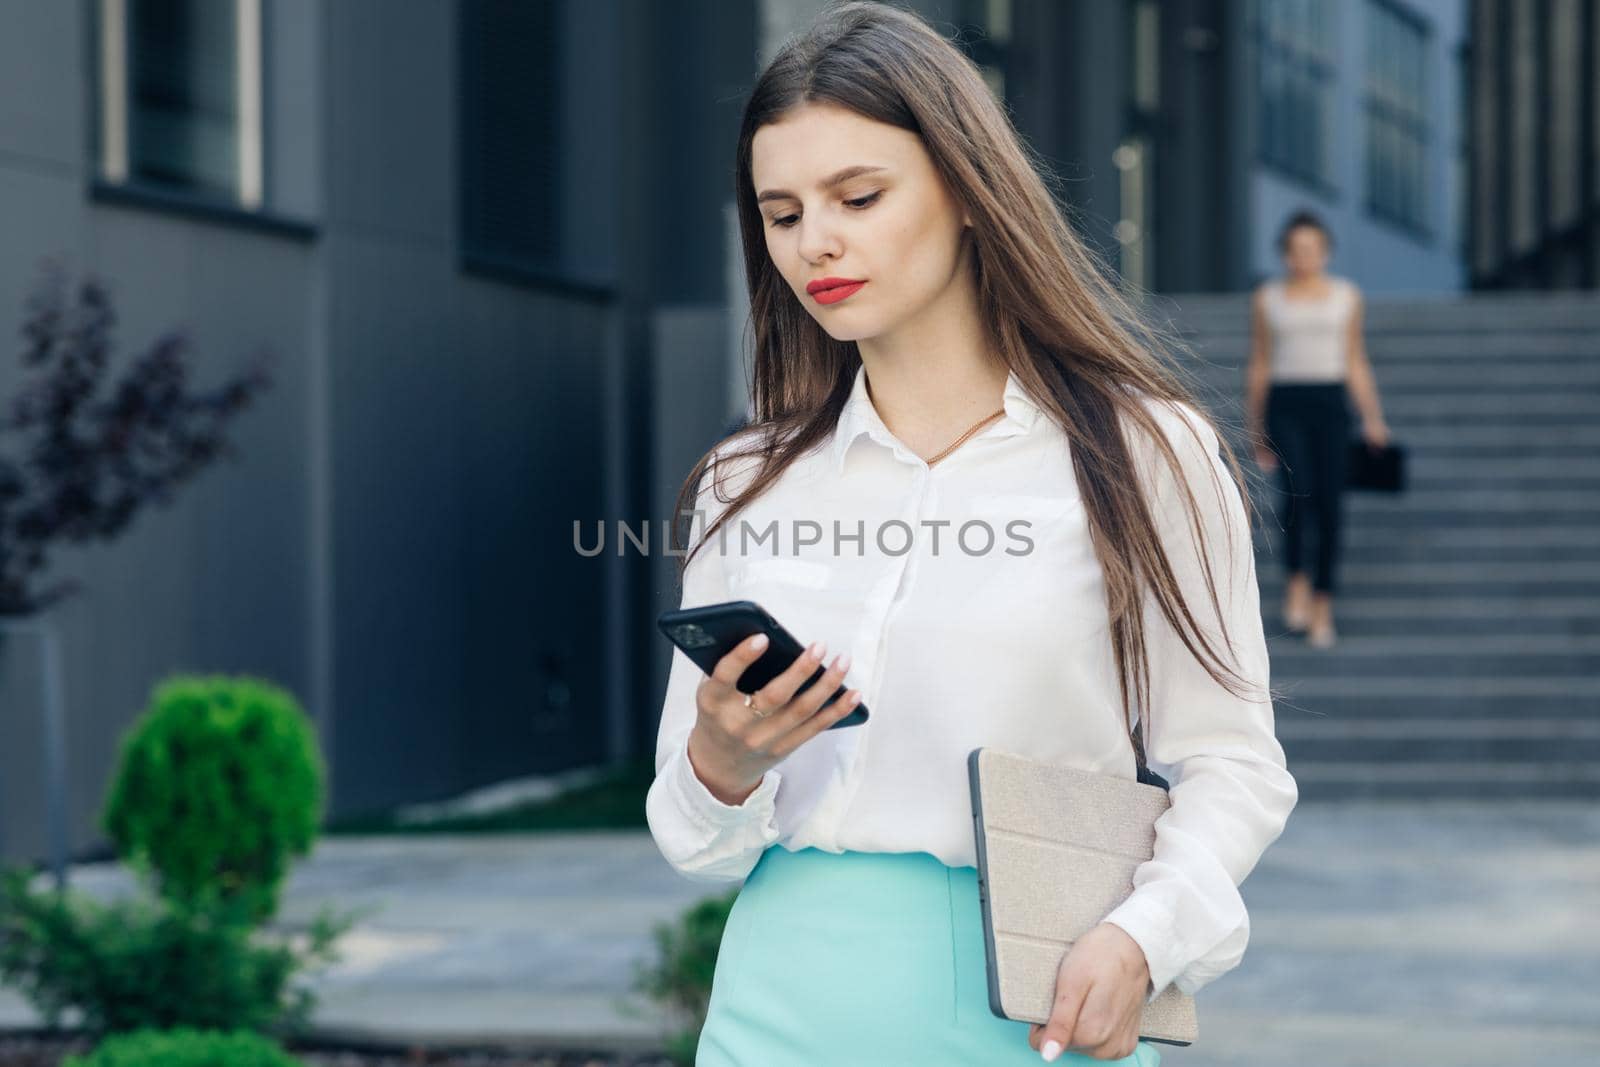 Stylish businesswoman using her phone outdoors. Beautiful female with long hair reading a message using her smartphone in front of building.